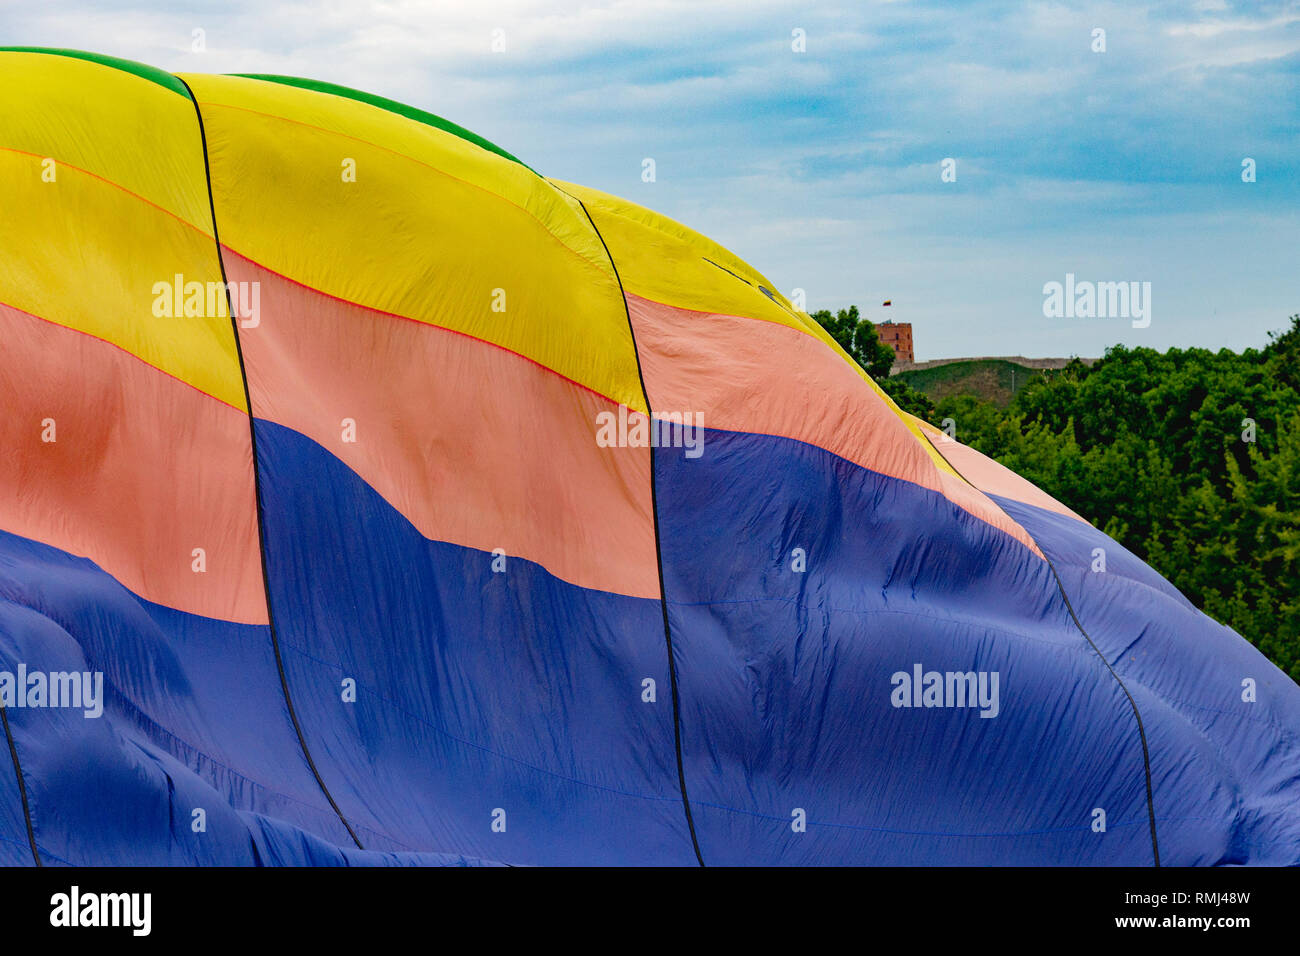 part of a multi-colored balloon against a cloudy sky Stock Photo